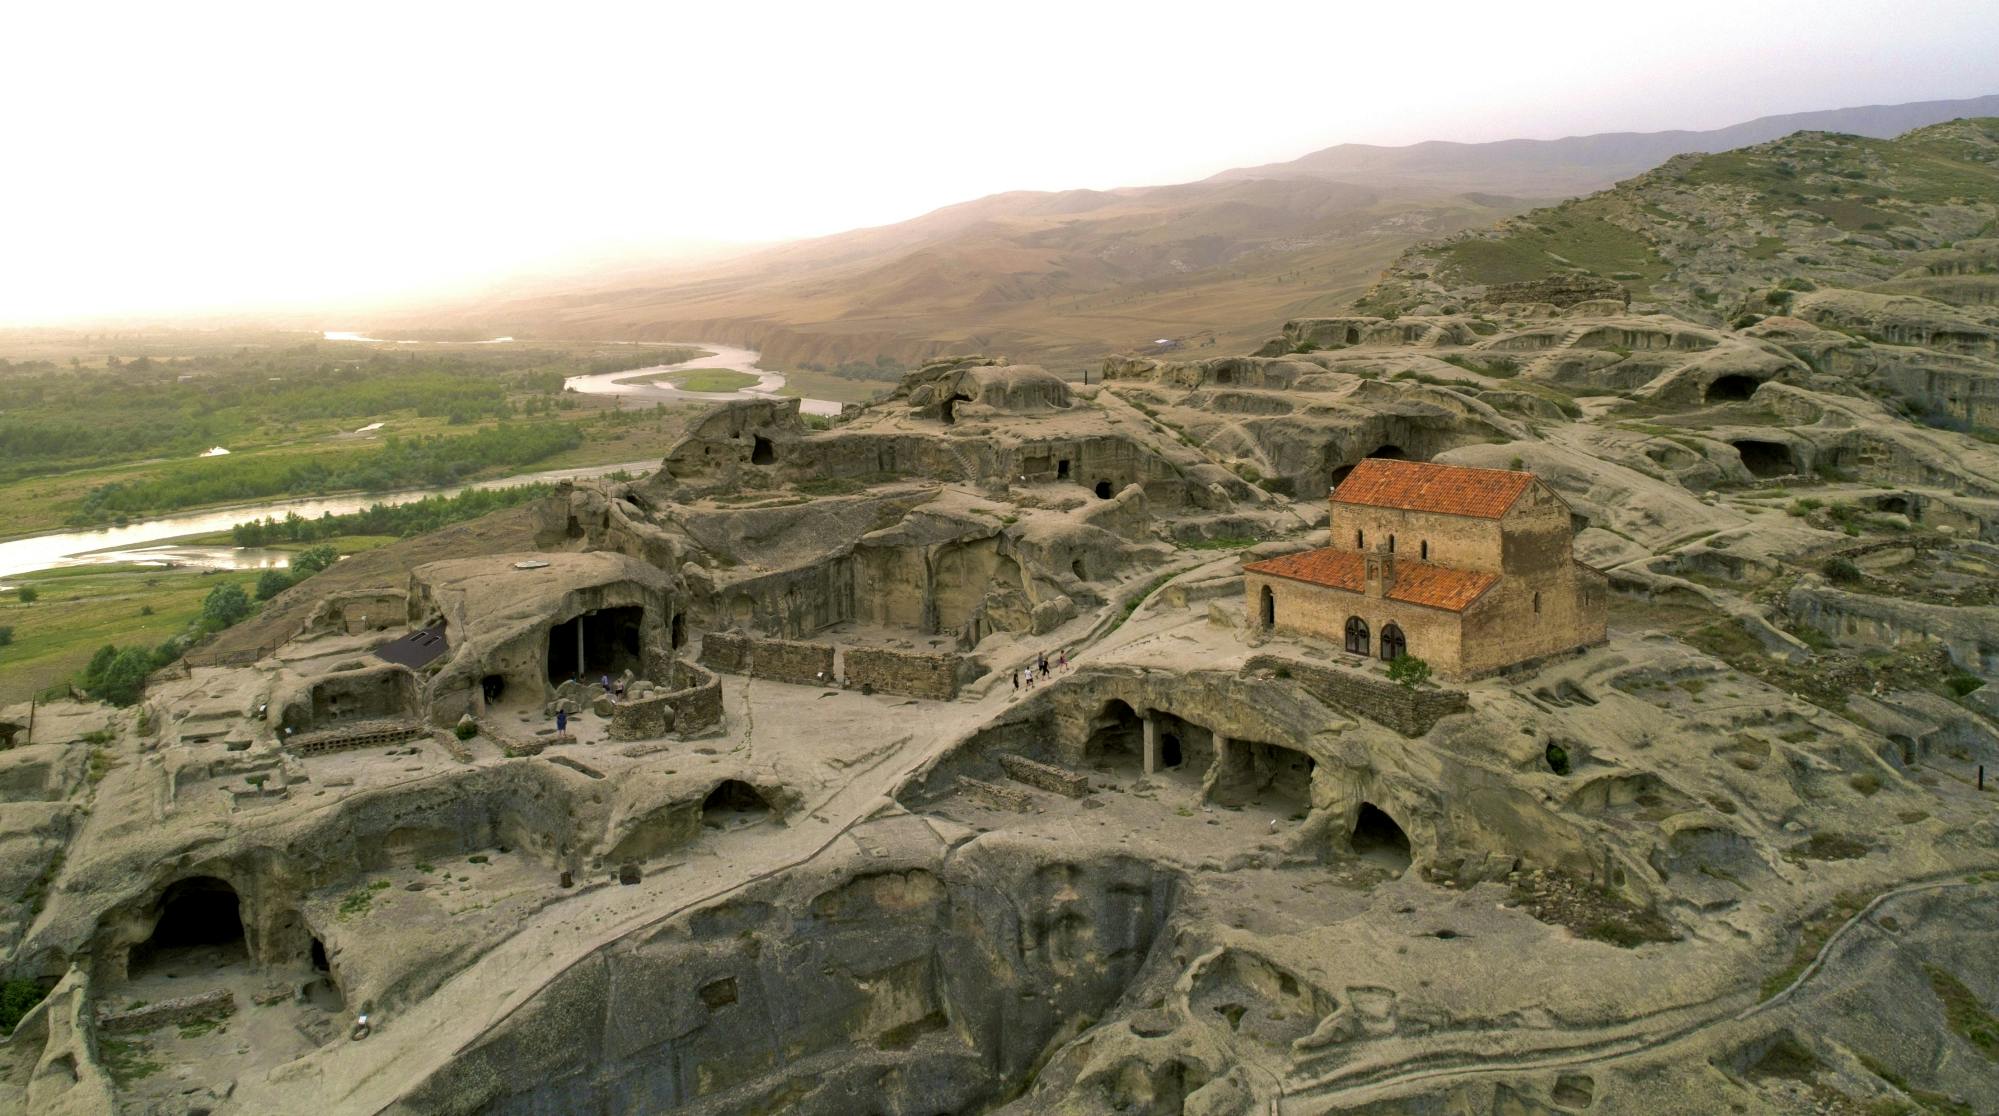 Uplistsikhe cave town Jvari monastery and more full day tour from Tbilisi Musement